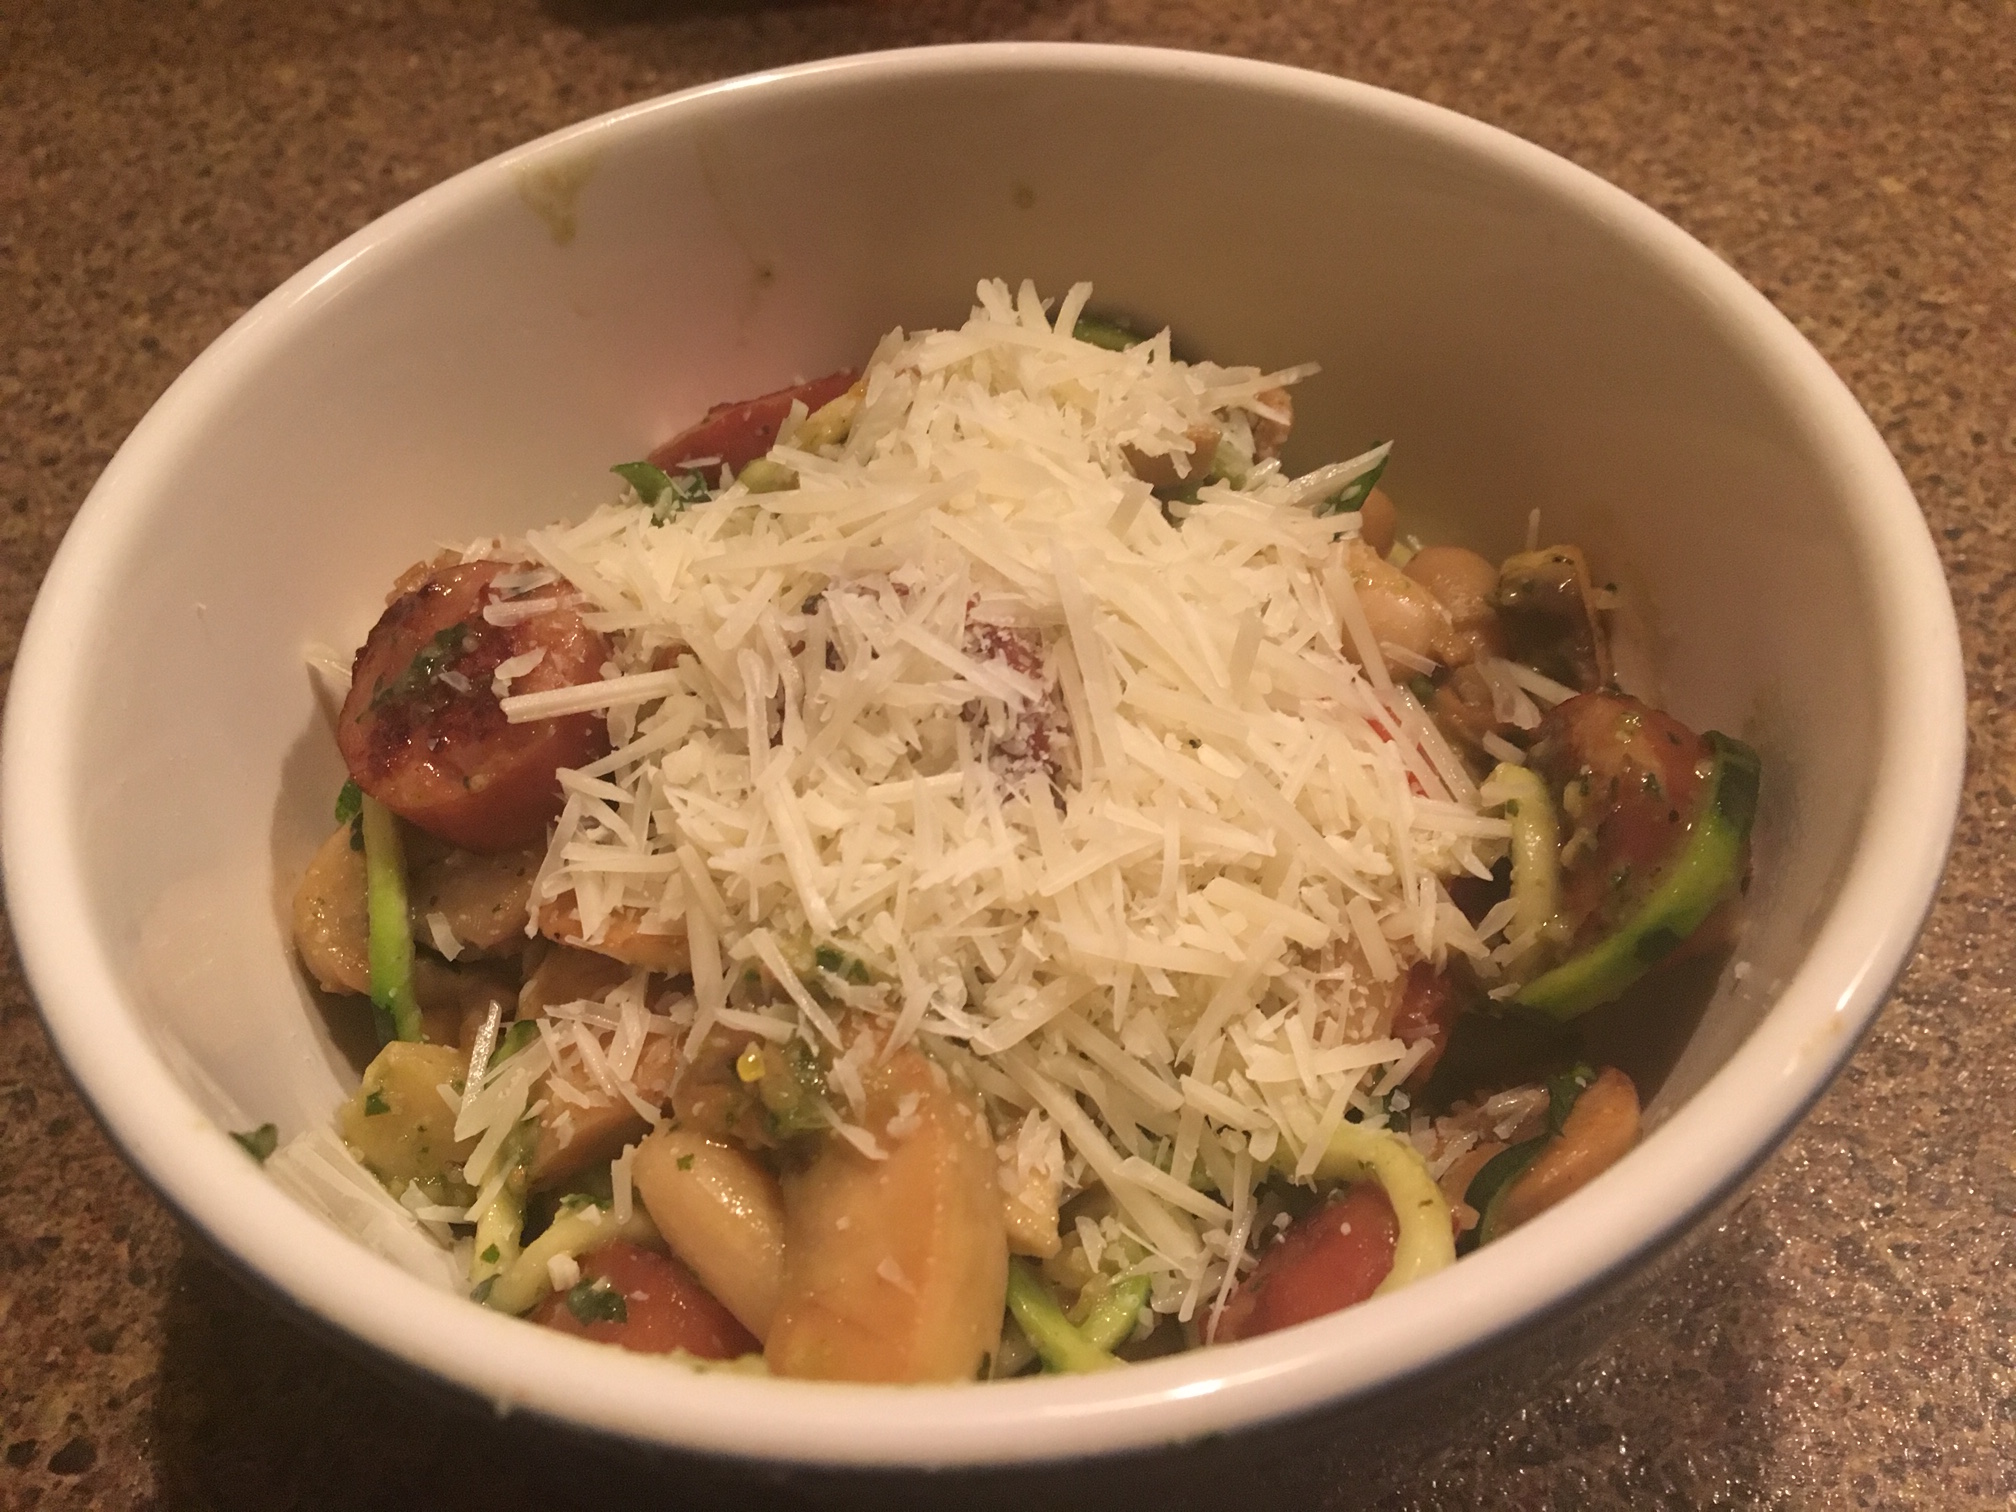 Zucchini noodles and sausage